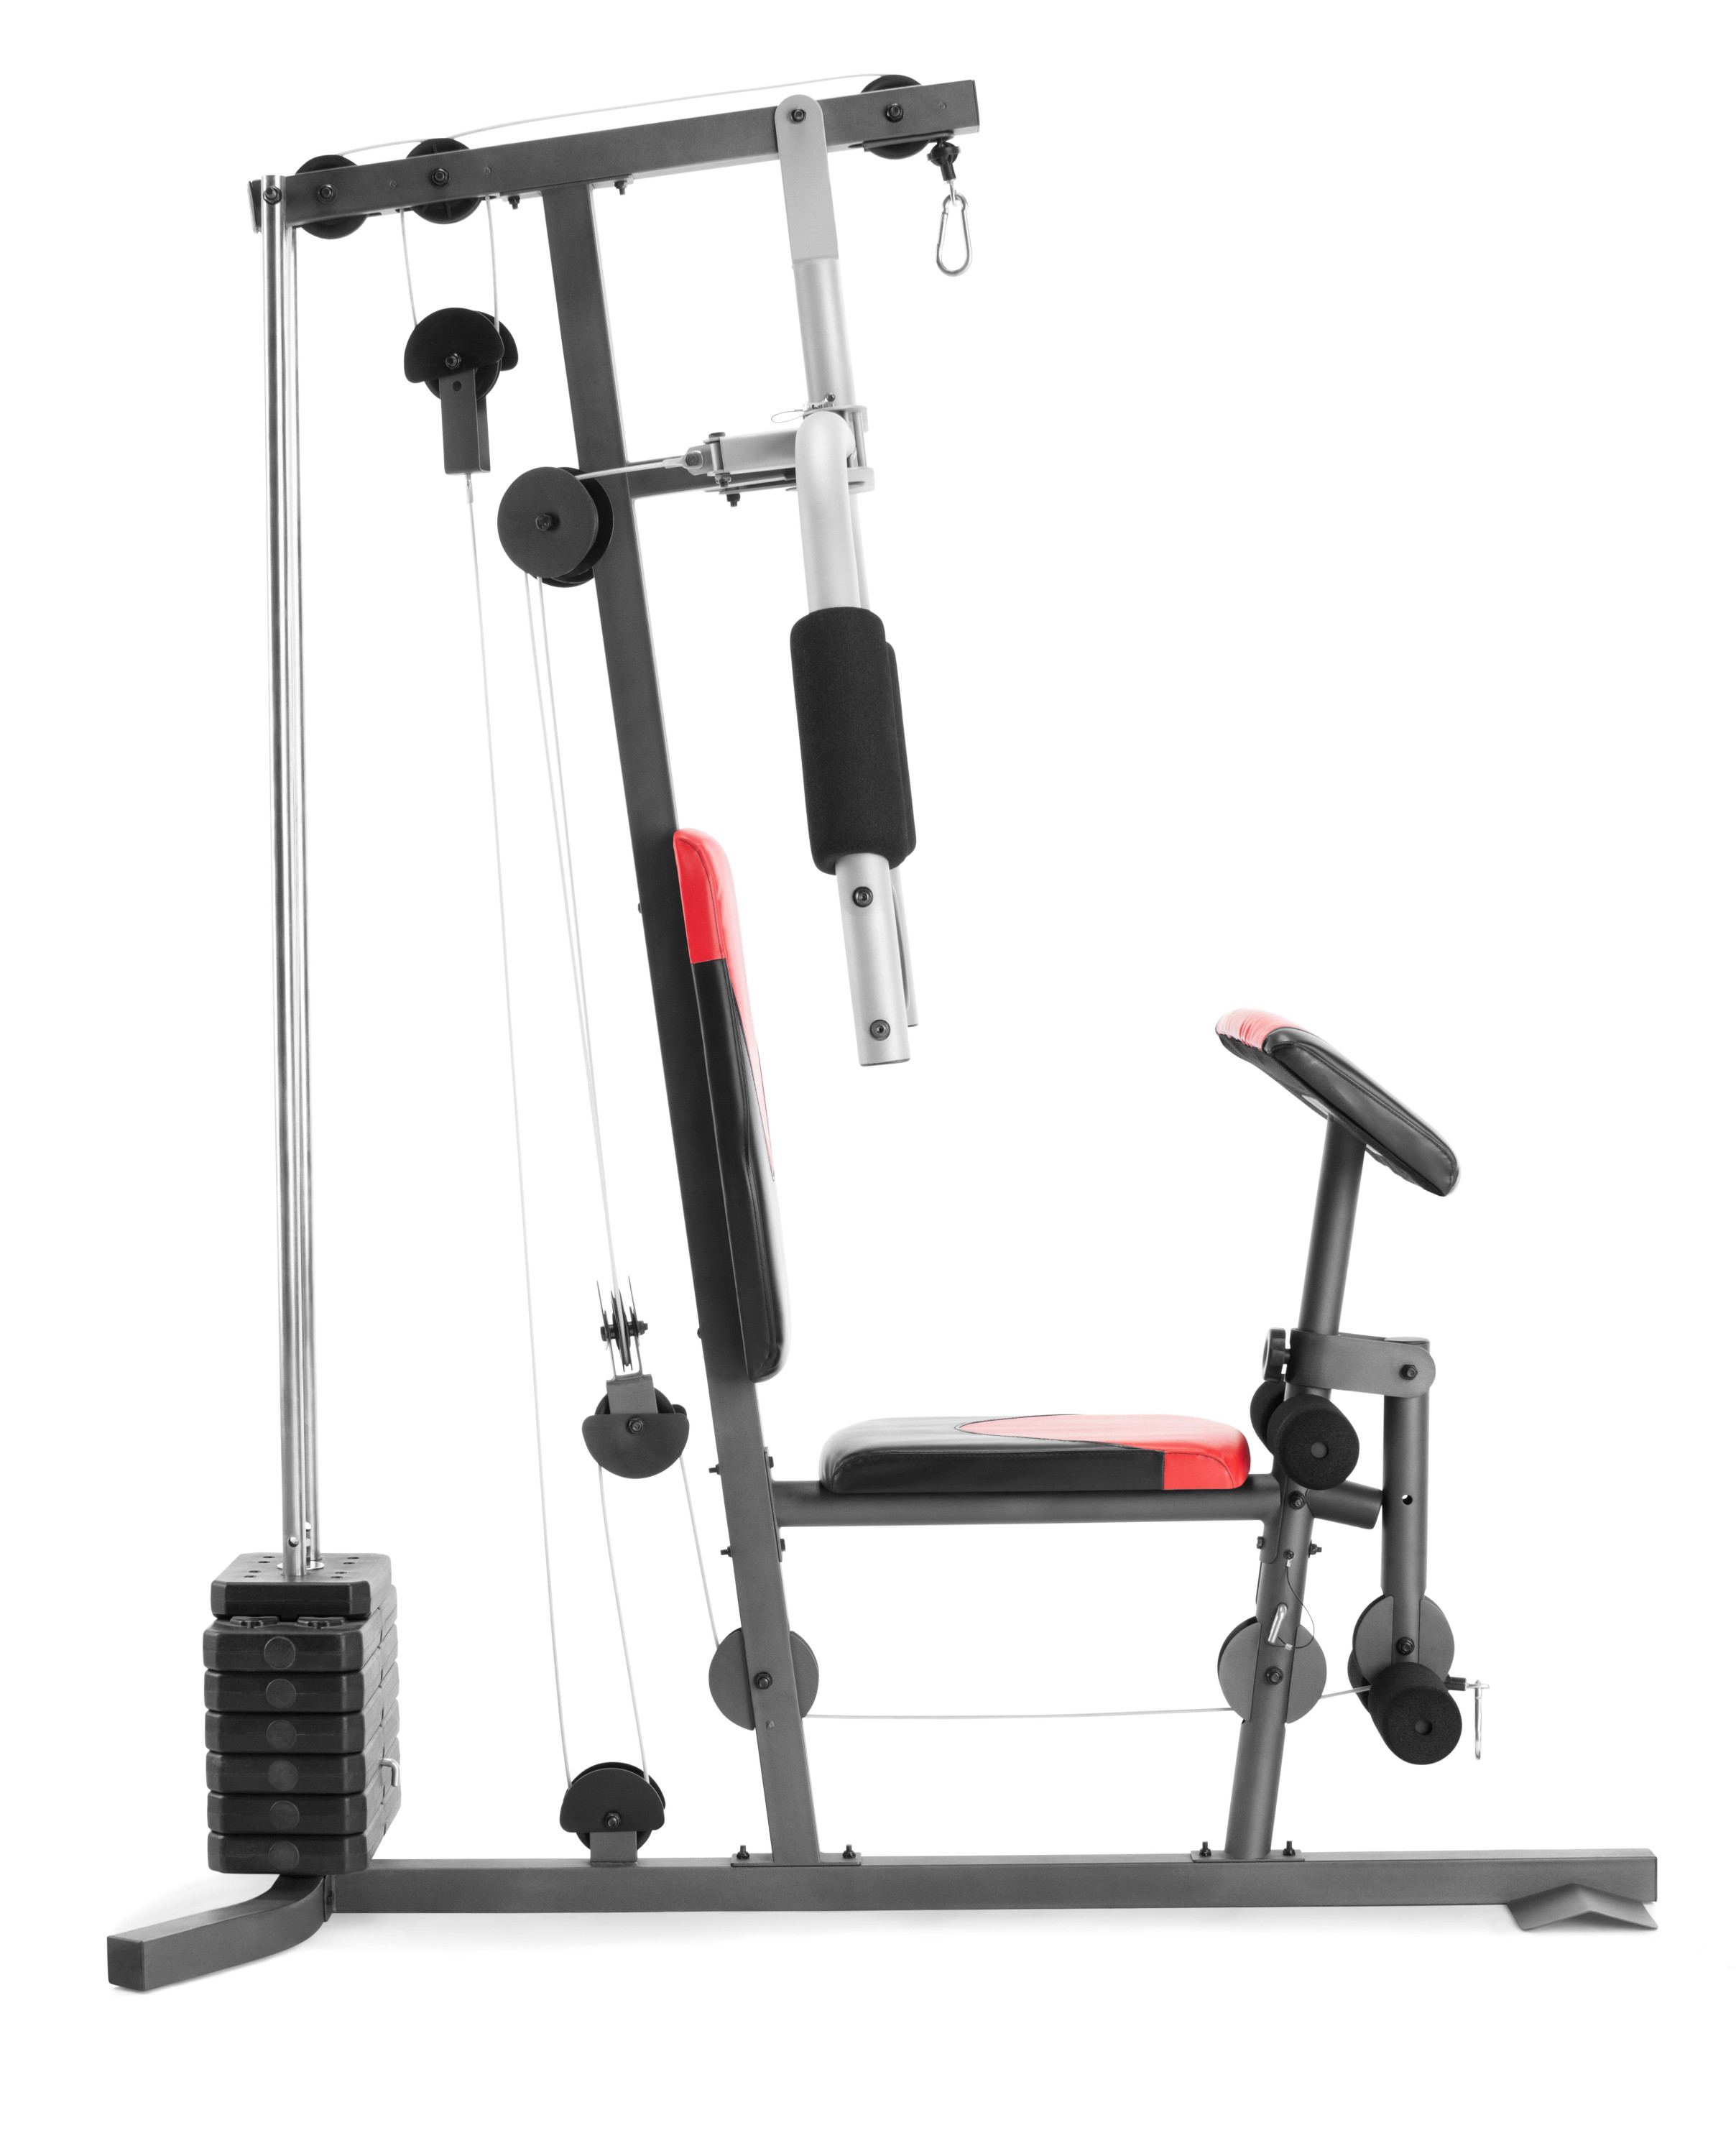 Weider 2980 X Home Gym with 80lb Vinyl Weight Stack - image 3 of 17